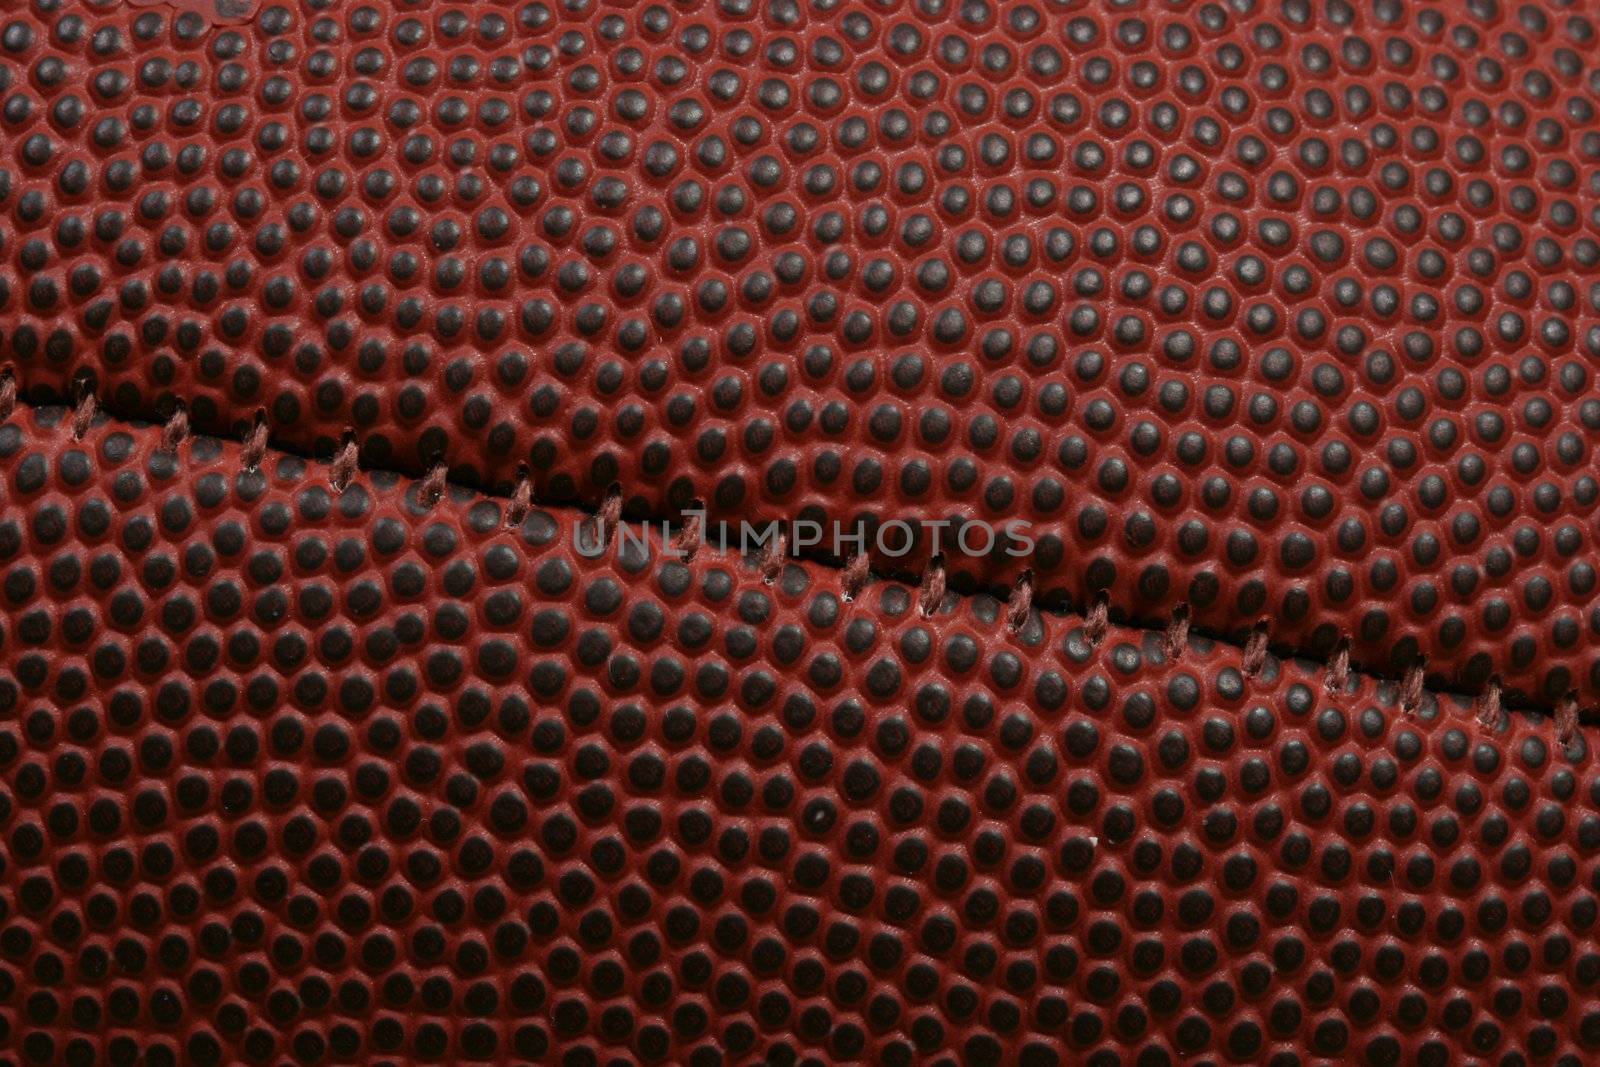 Extreme close-up of football with seam